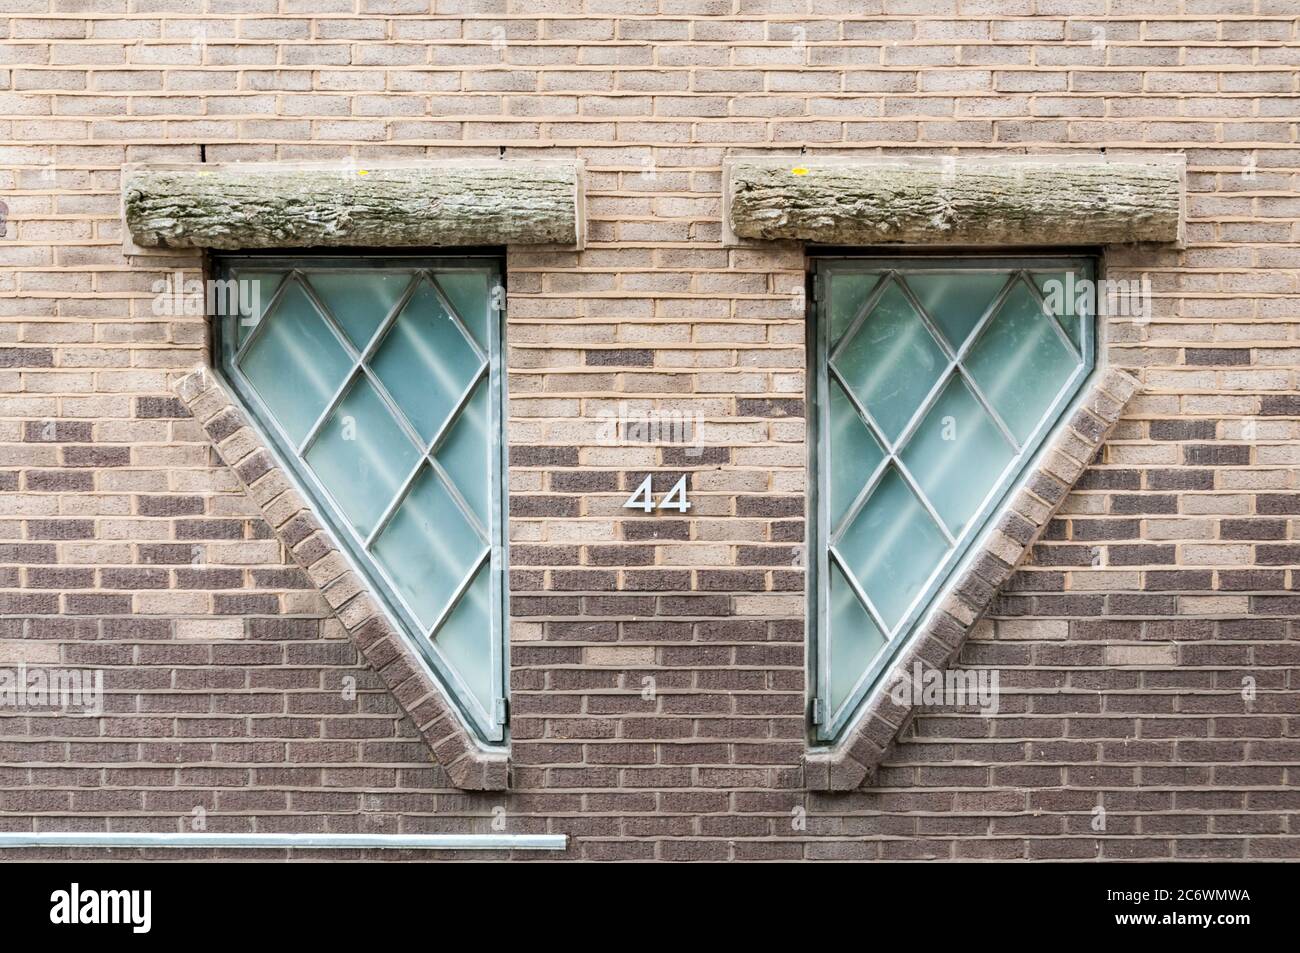 Window detail of Grade II listed post-modern house at 44 Britton Street, Clerkenwell. Designed by Piers Gough in 1986 for Janet Street-Porter. Stock Photo